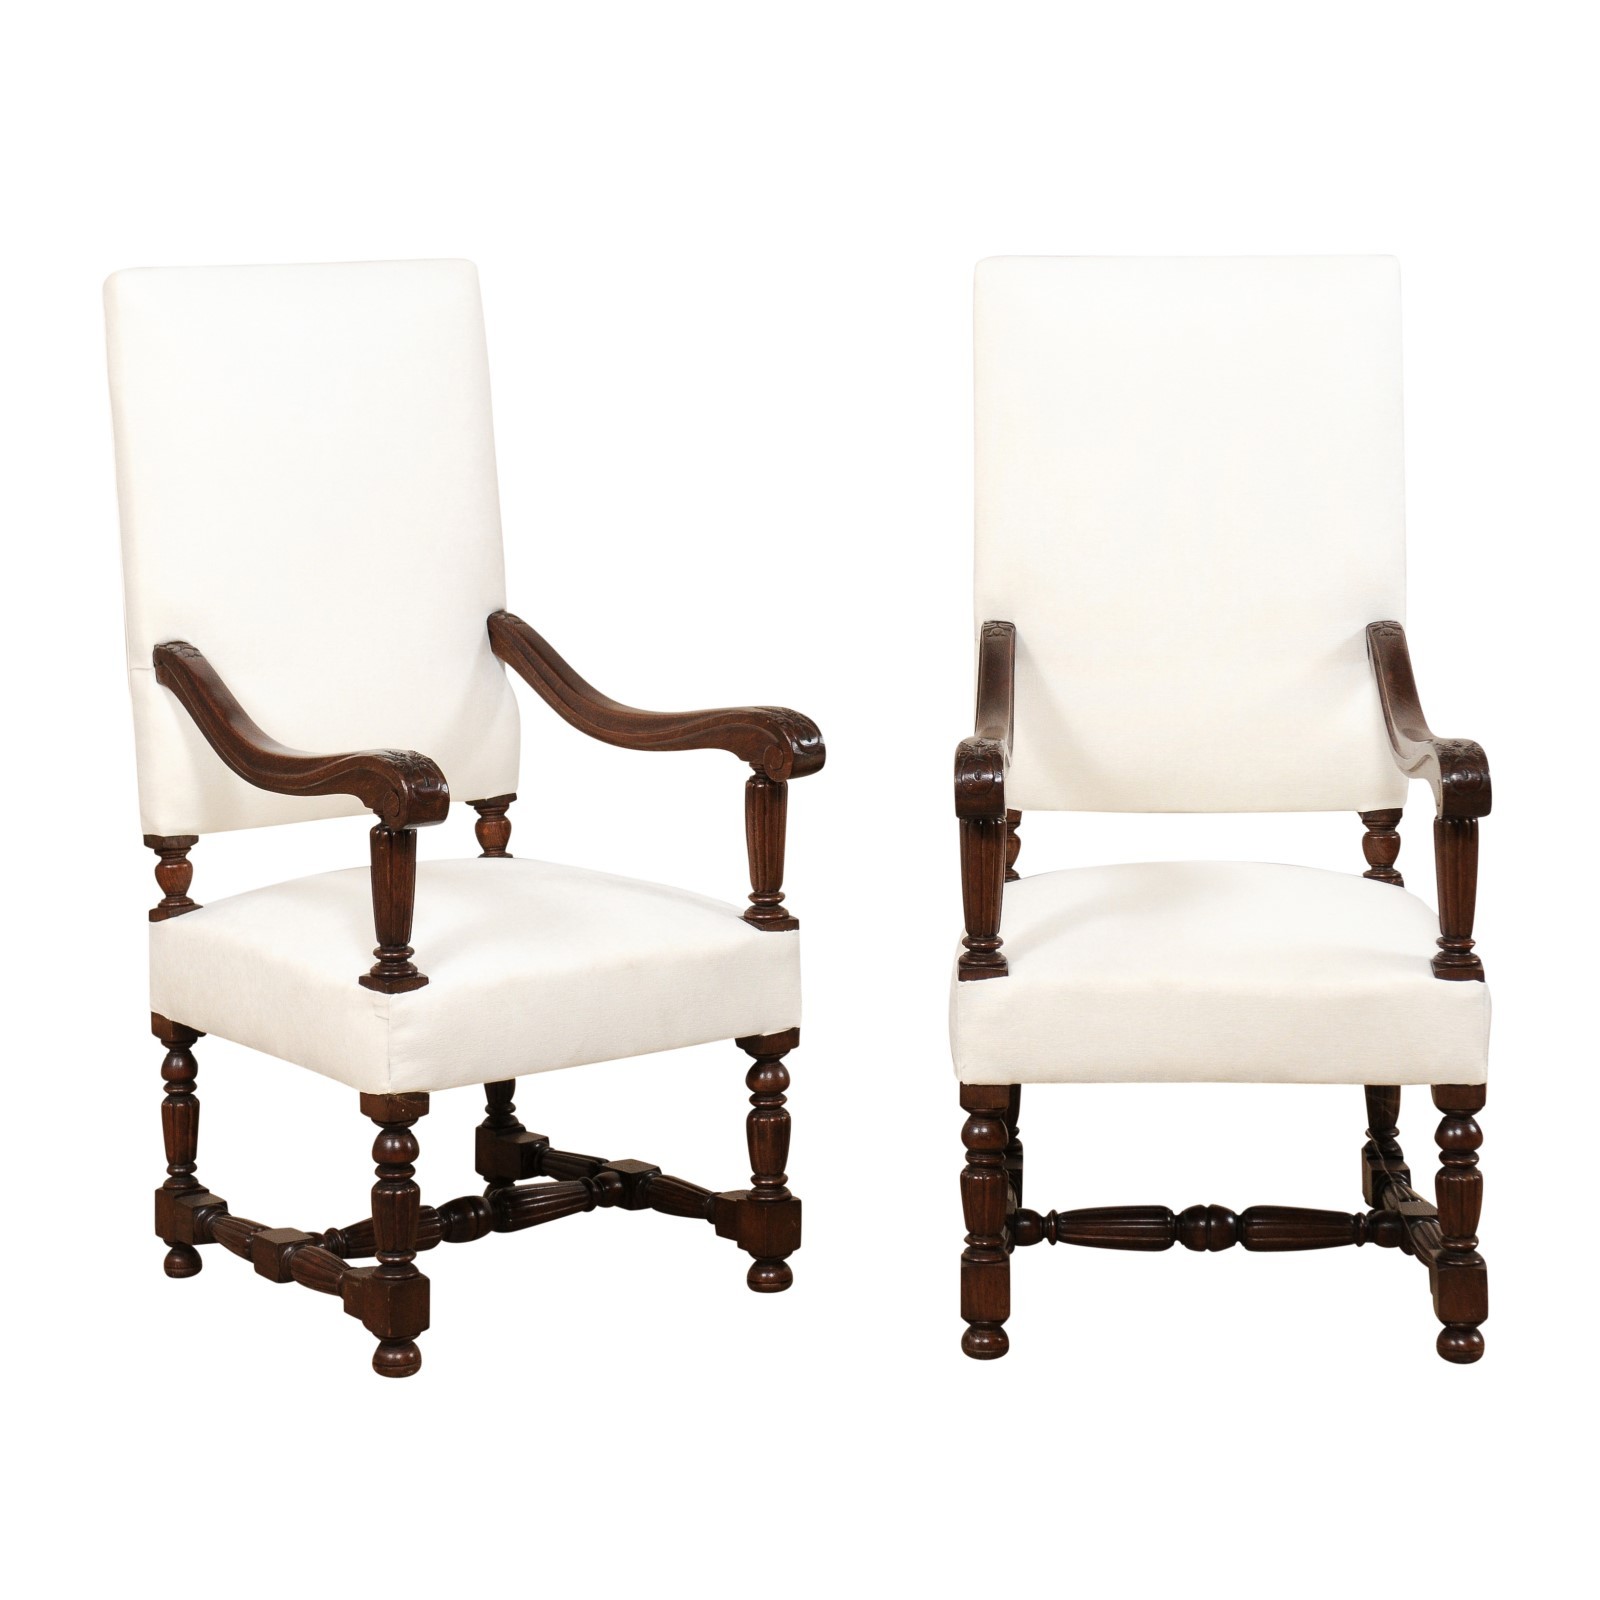 A Stately Pair of 19th C. Italian Armchairs